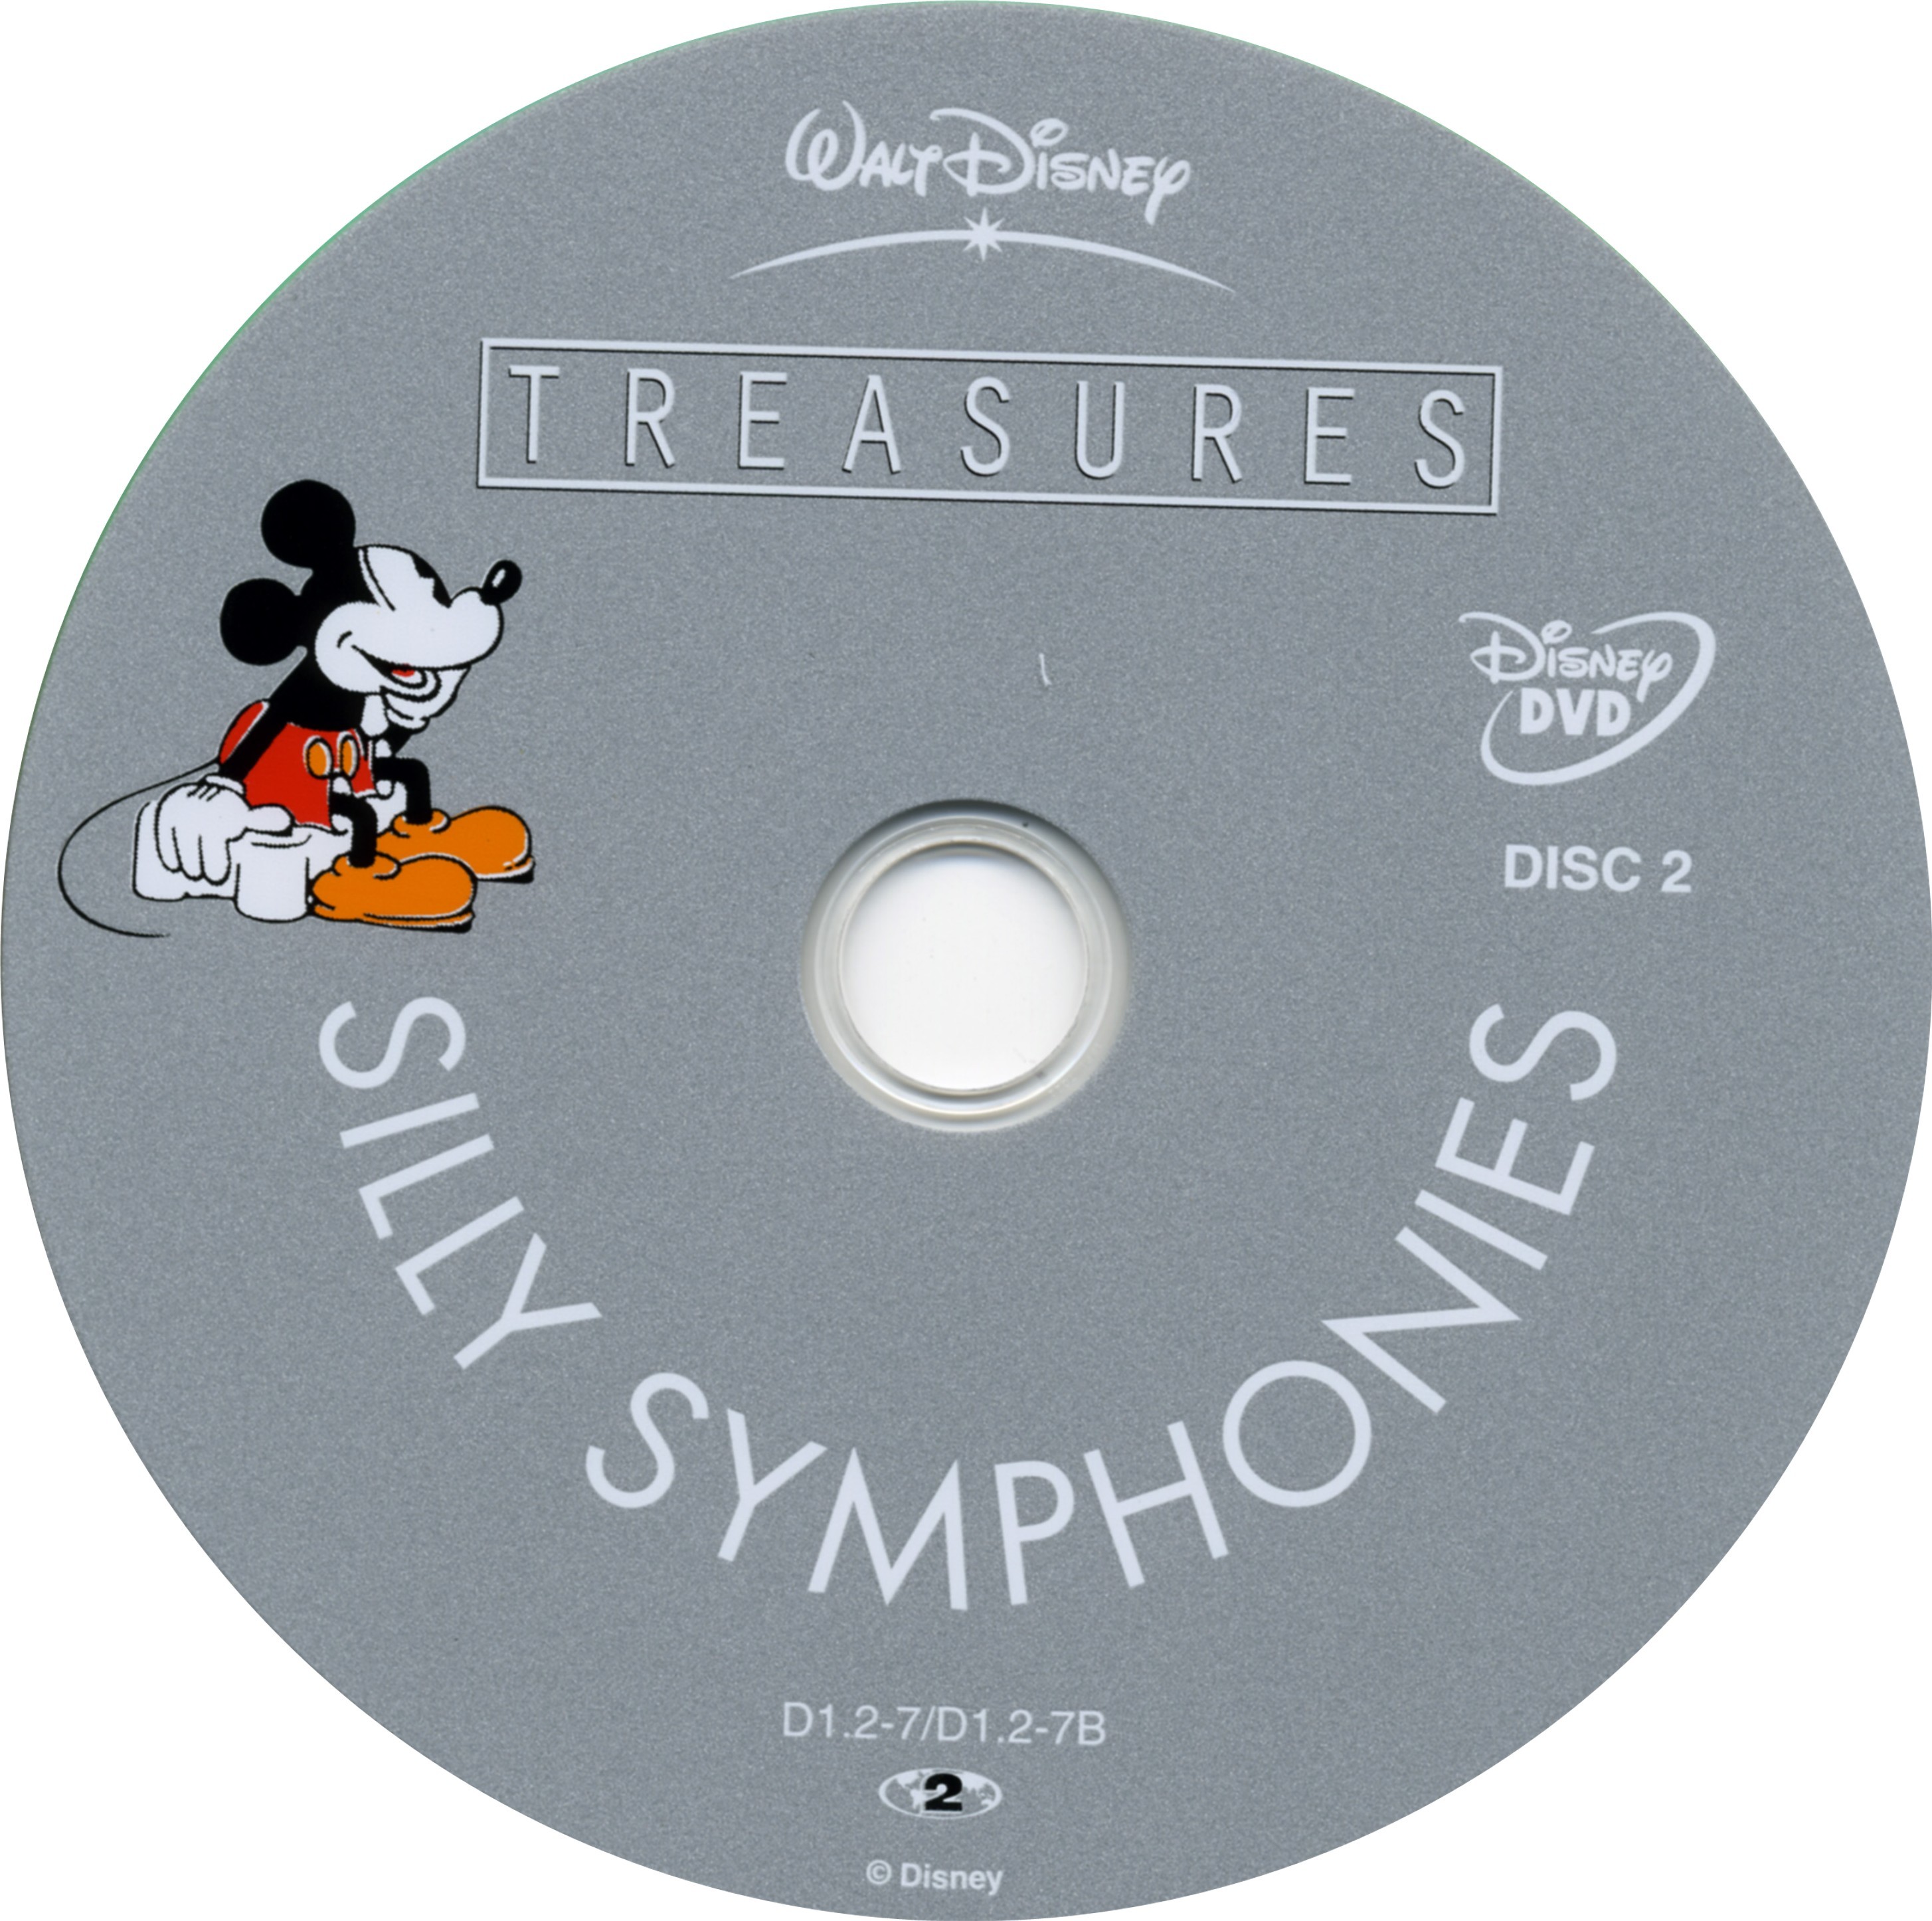 Silly symphonies Disc 2